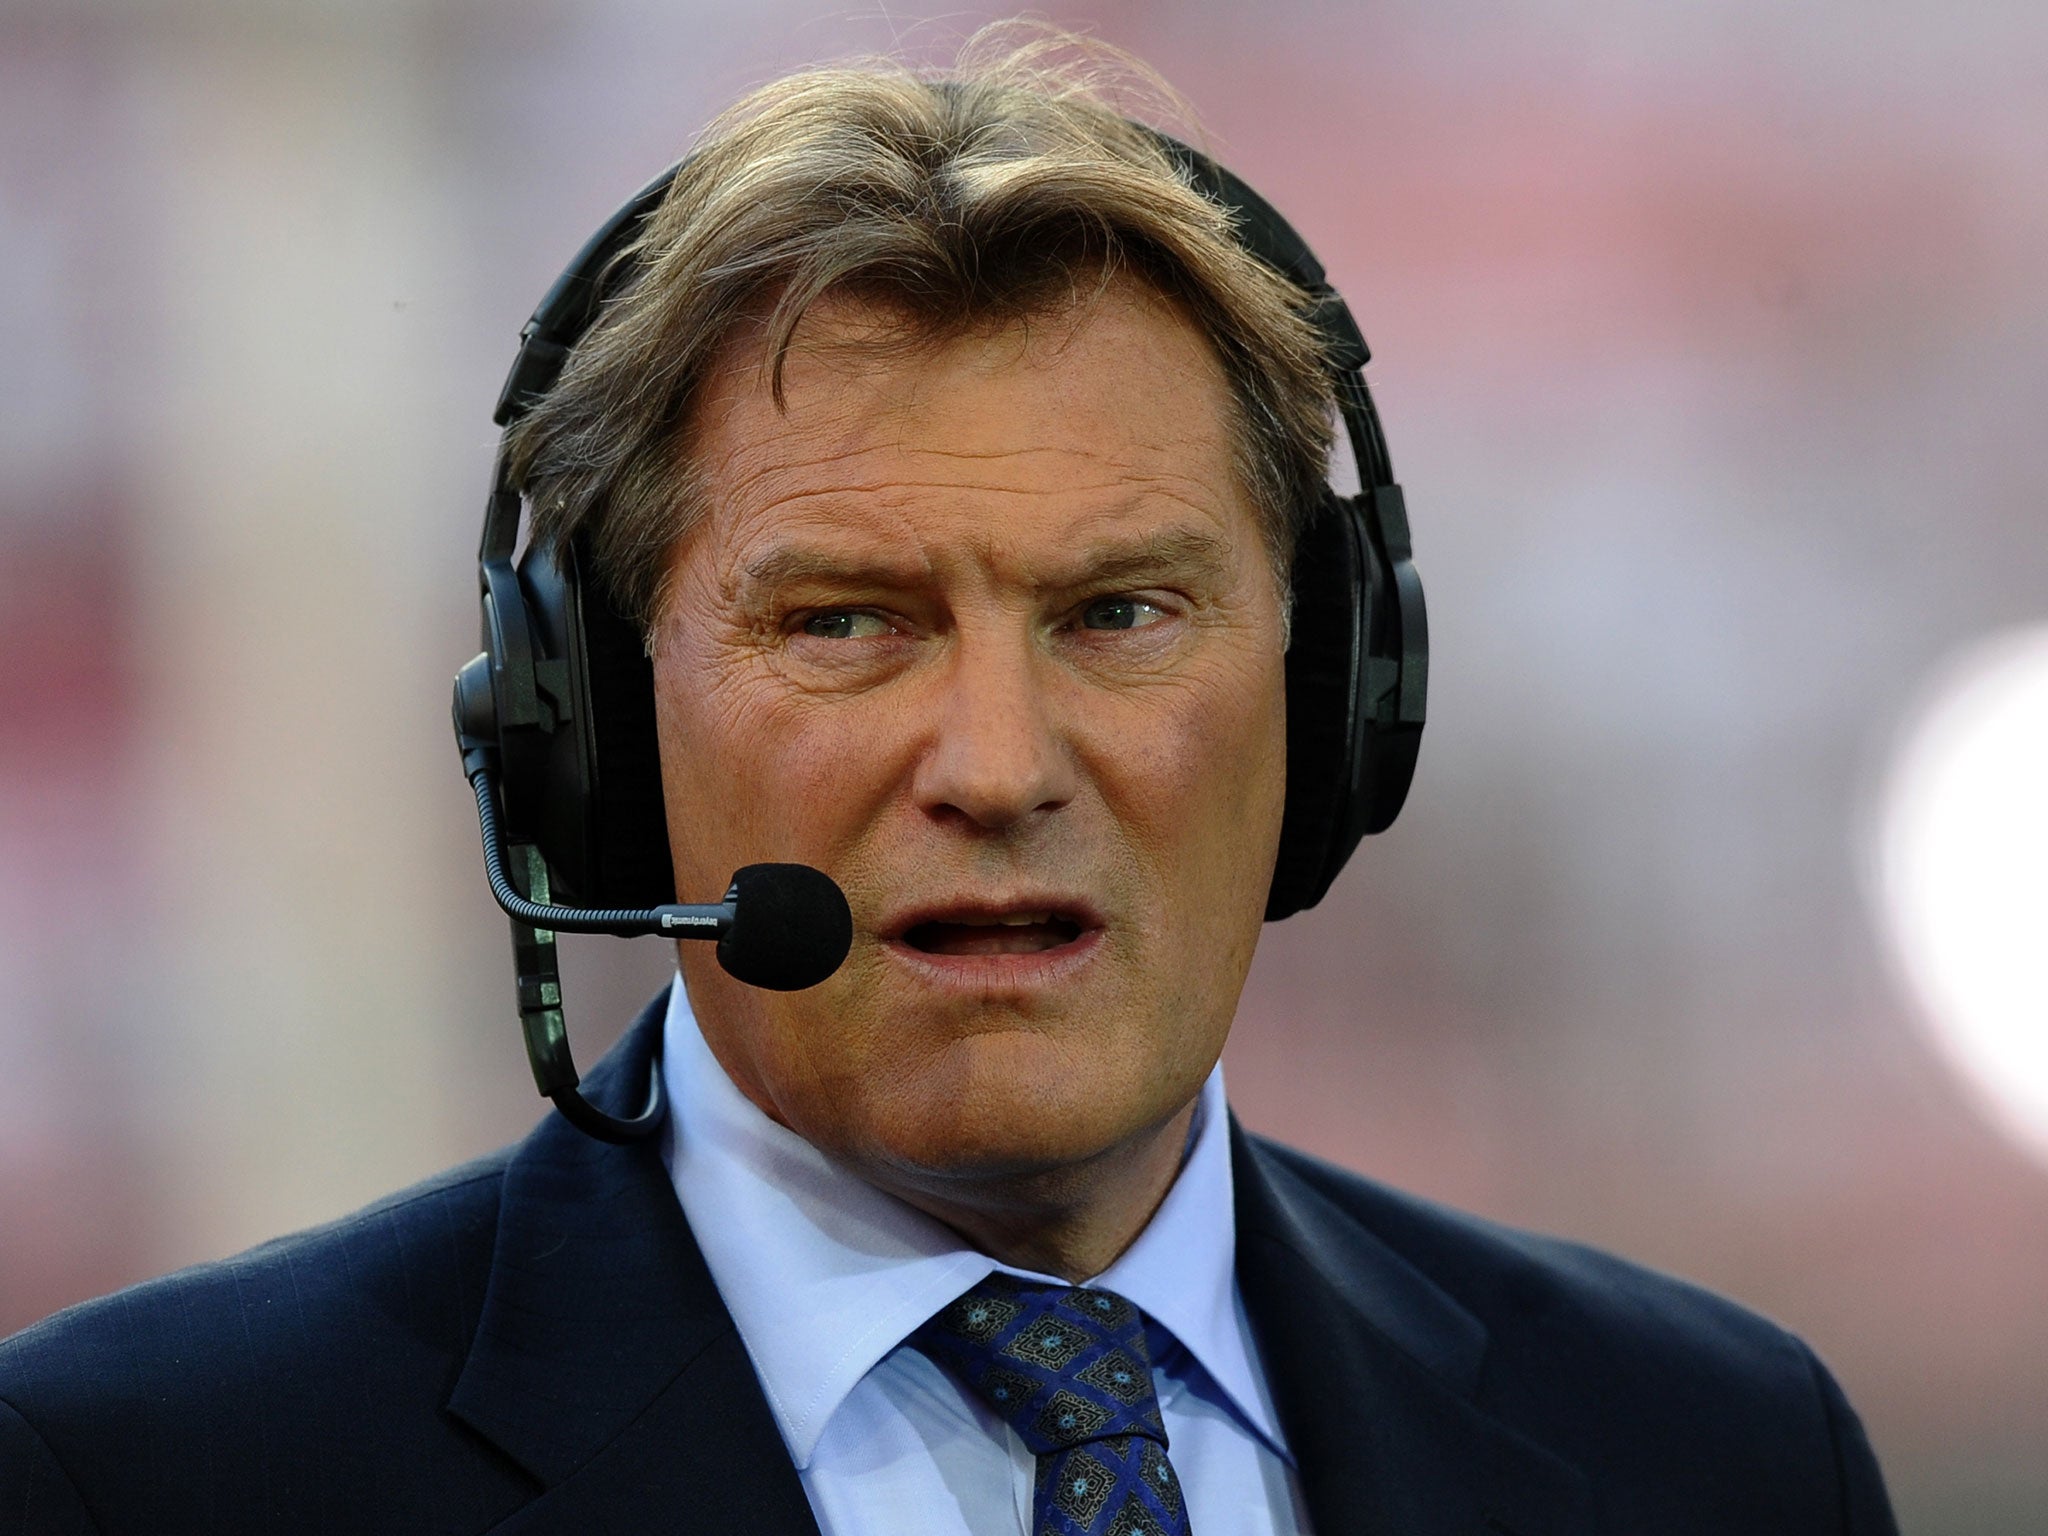 Glenn Hoddle thinks this is the most exciting Premier League season in history